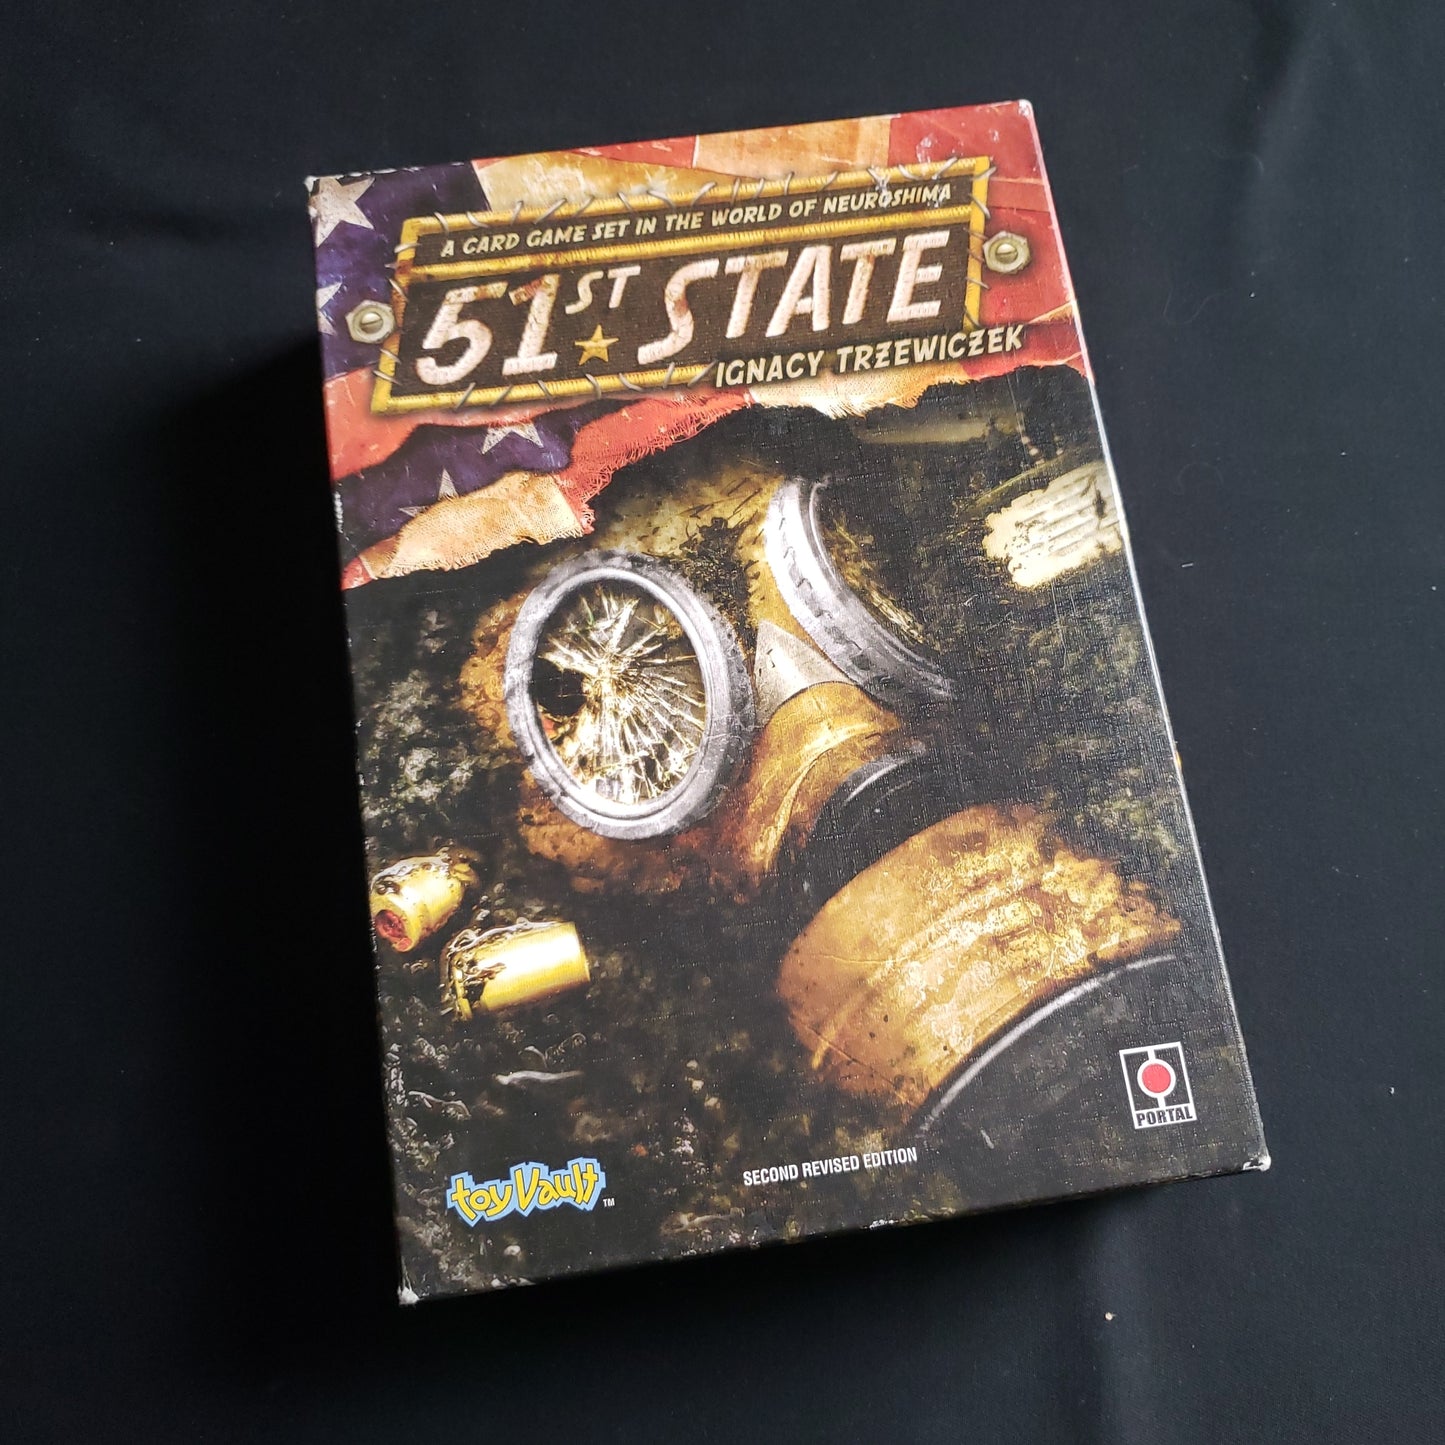 Image shows the front cover of the box of the 51st State card game